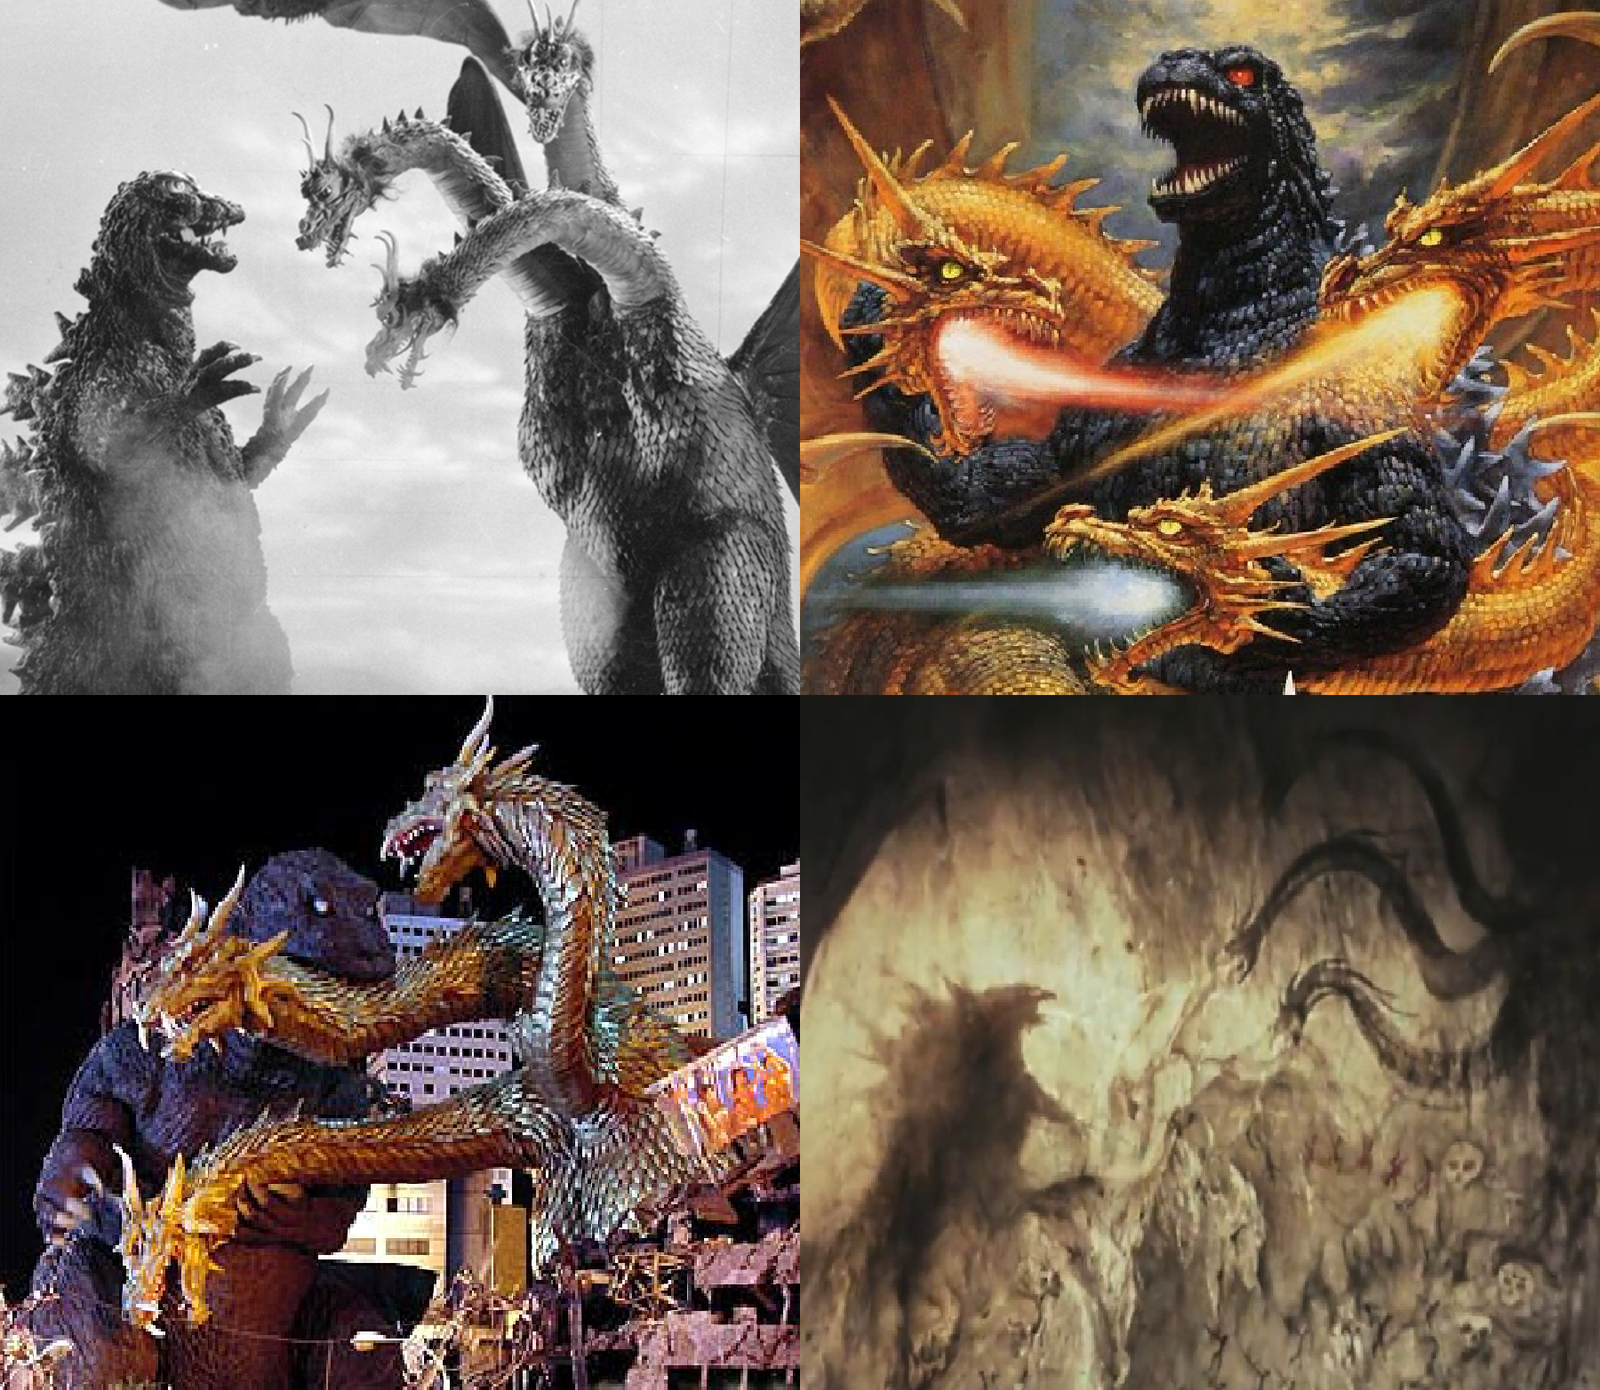 Godzilla Vs King Ghidorah - Godzilla vs. King Ghidorah (1991) - Posters — T...